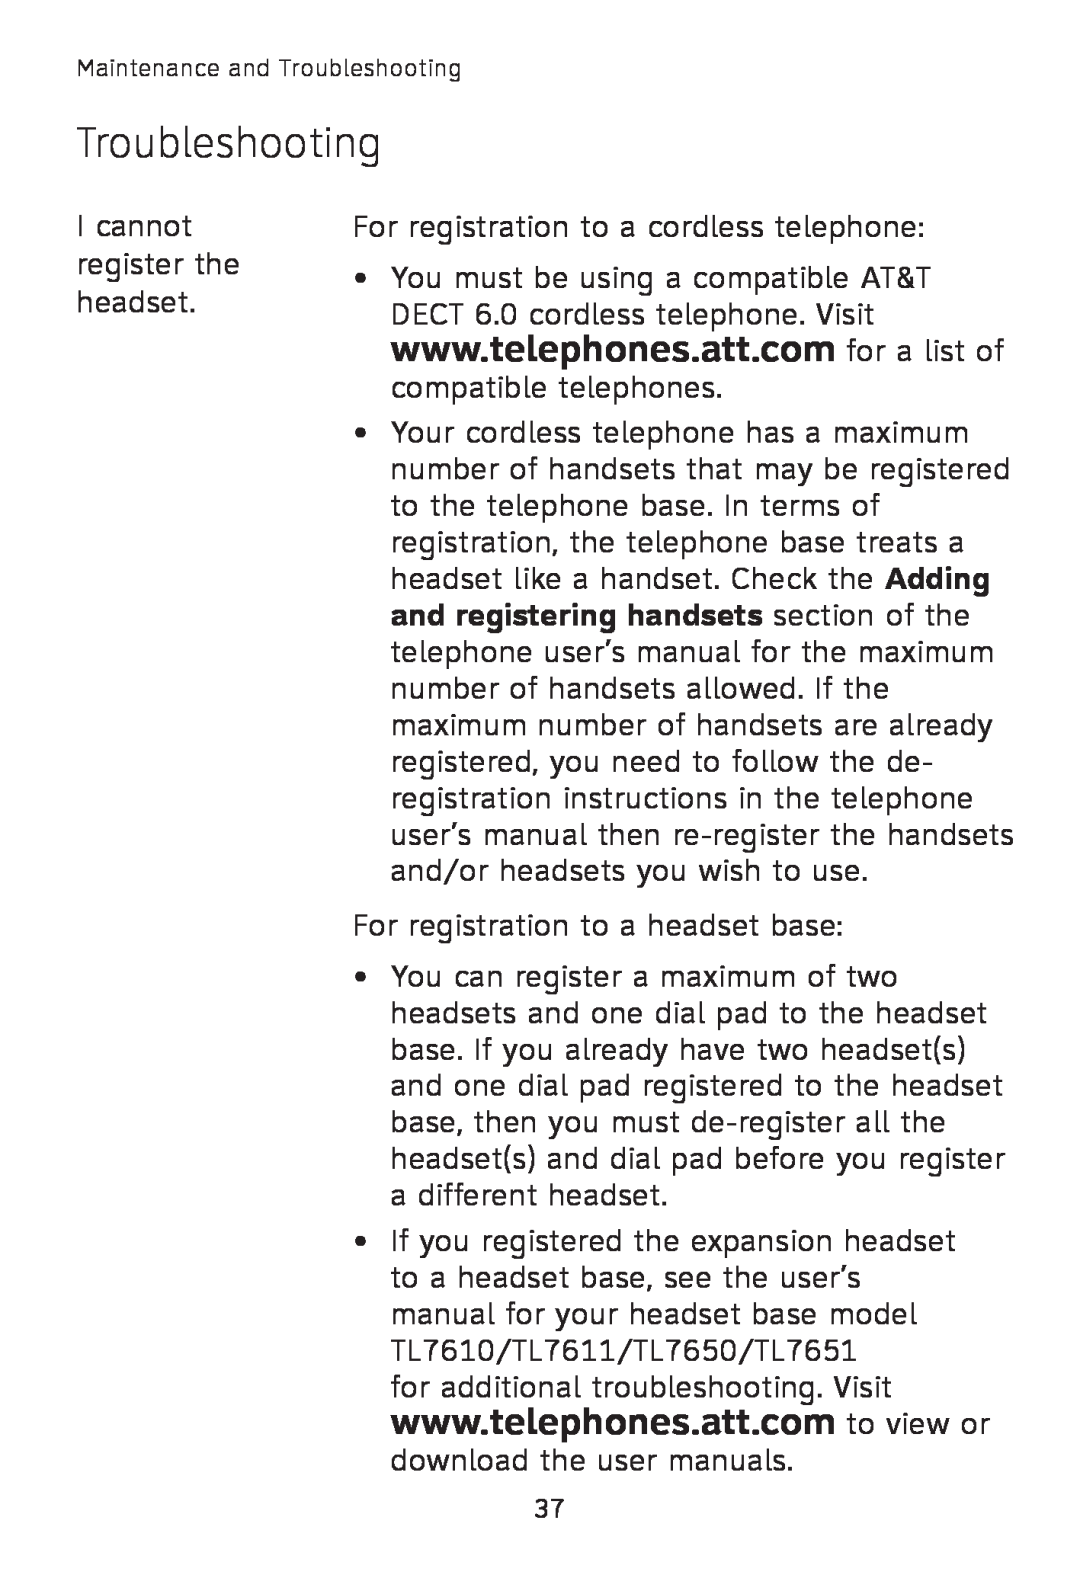 AT&T TL7600 user manual Troubleshooting, Icannot register the headset 